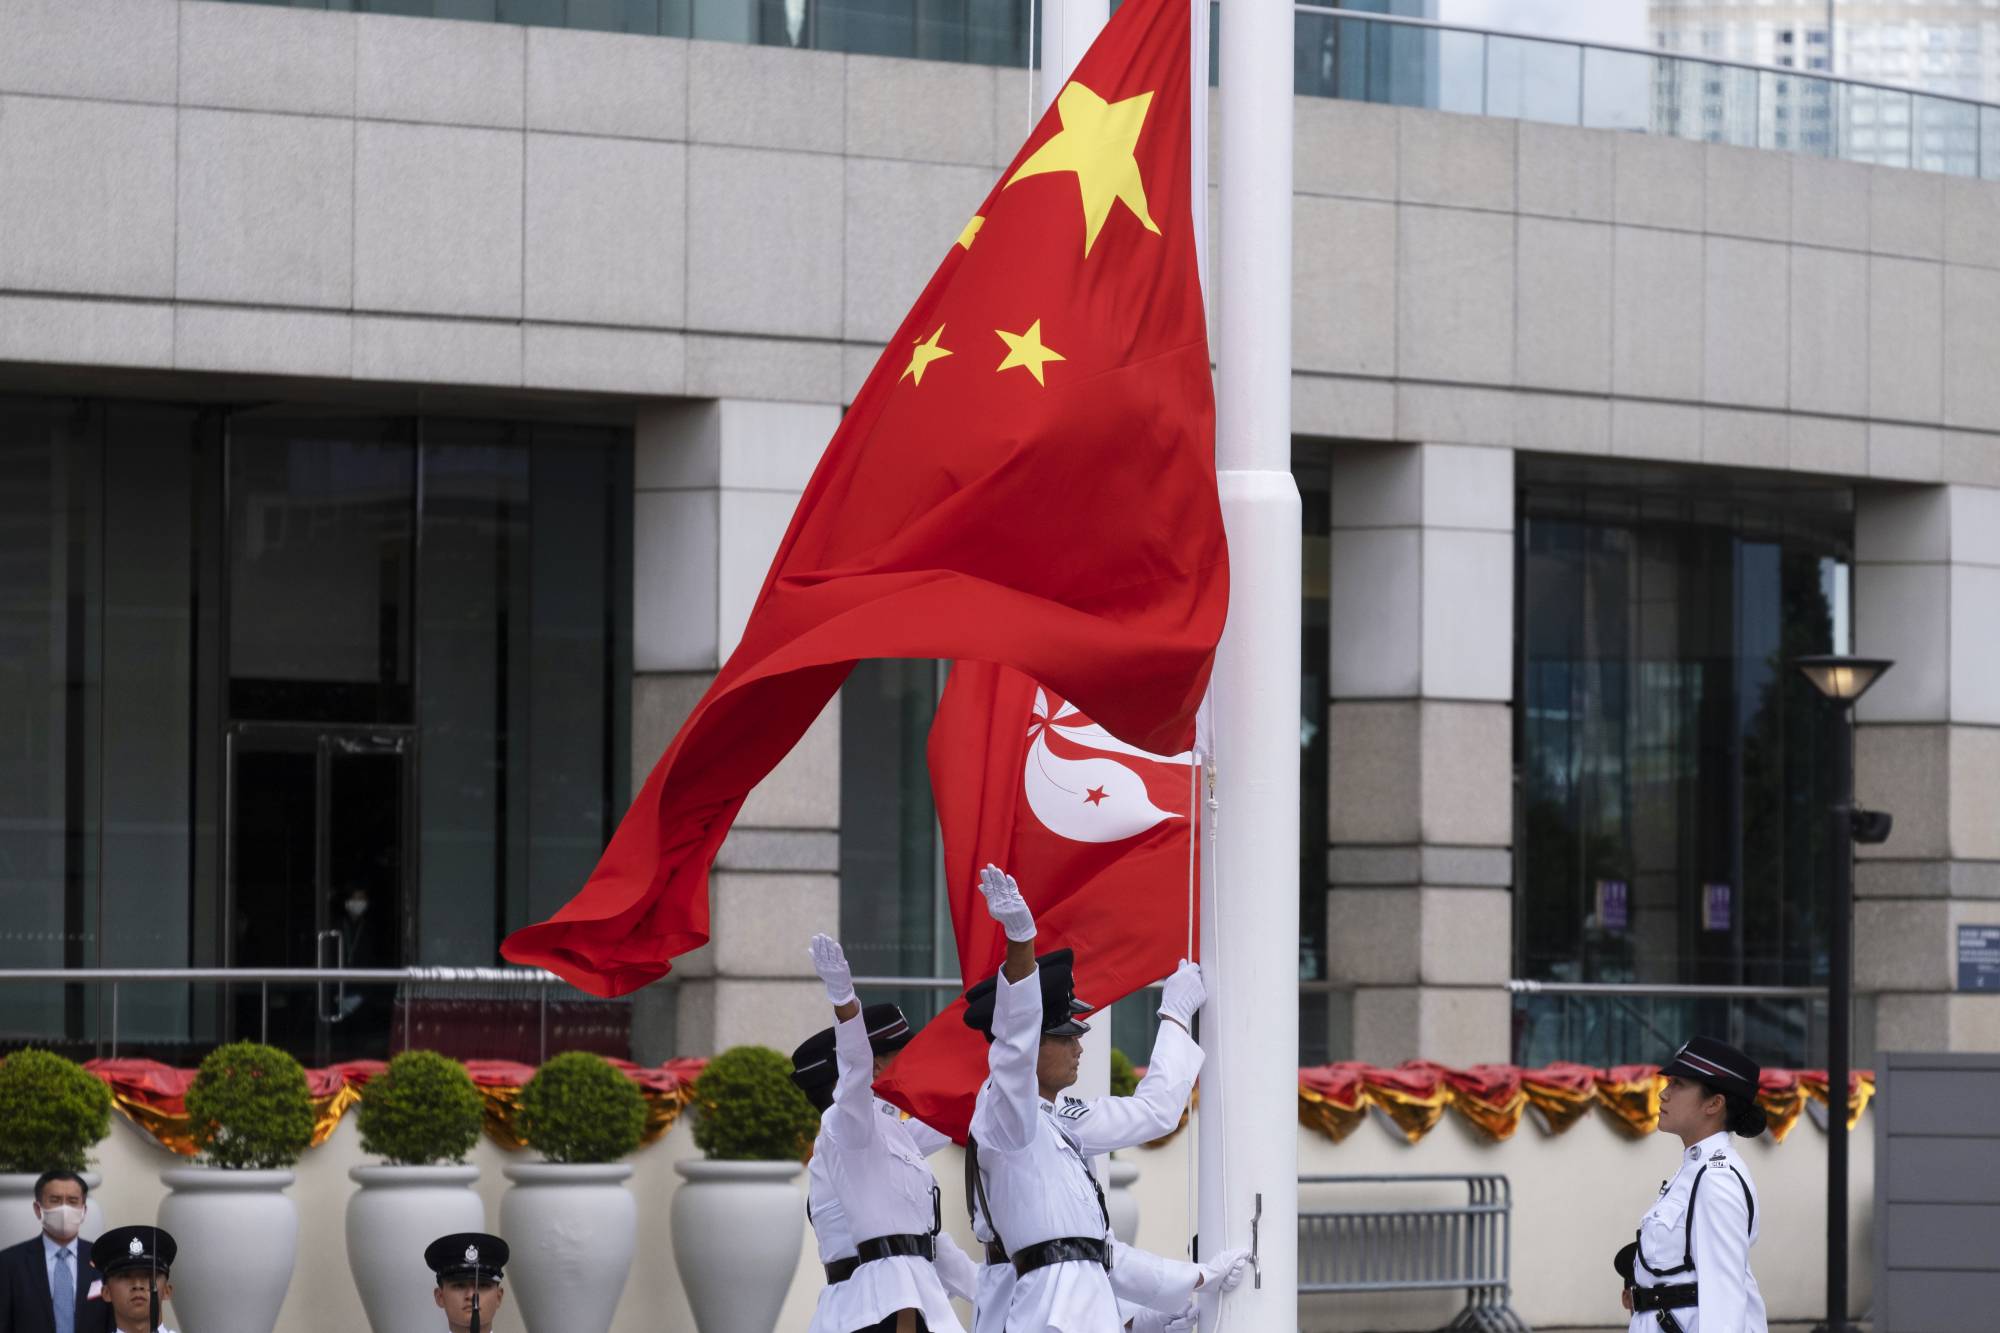 The flags of China and Hong Kong are raised during a ceremony to mark the 23rd anniversary of Hong Kong's return to Chinese rule on Wednesday in the financial hub. | BLOOMBERG